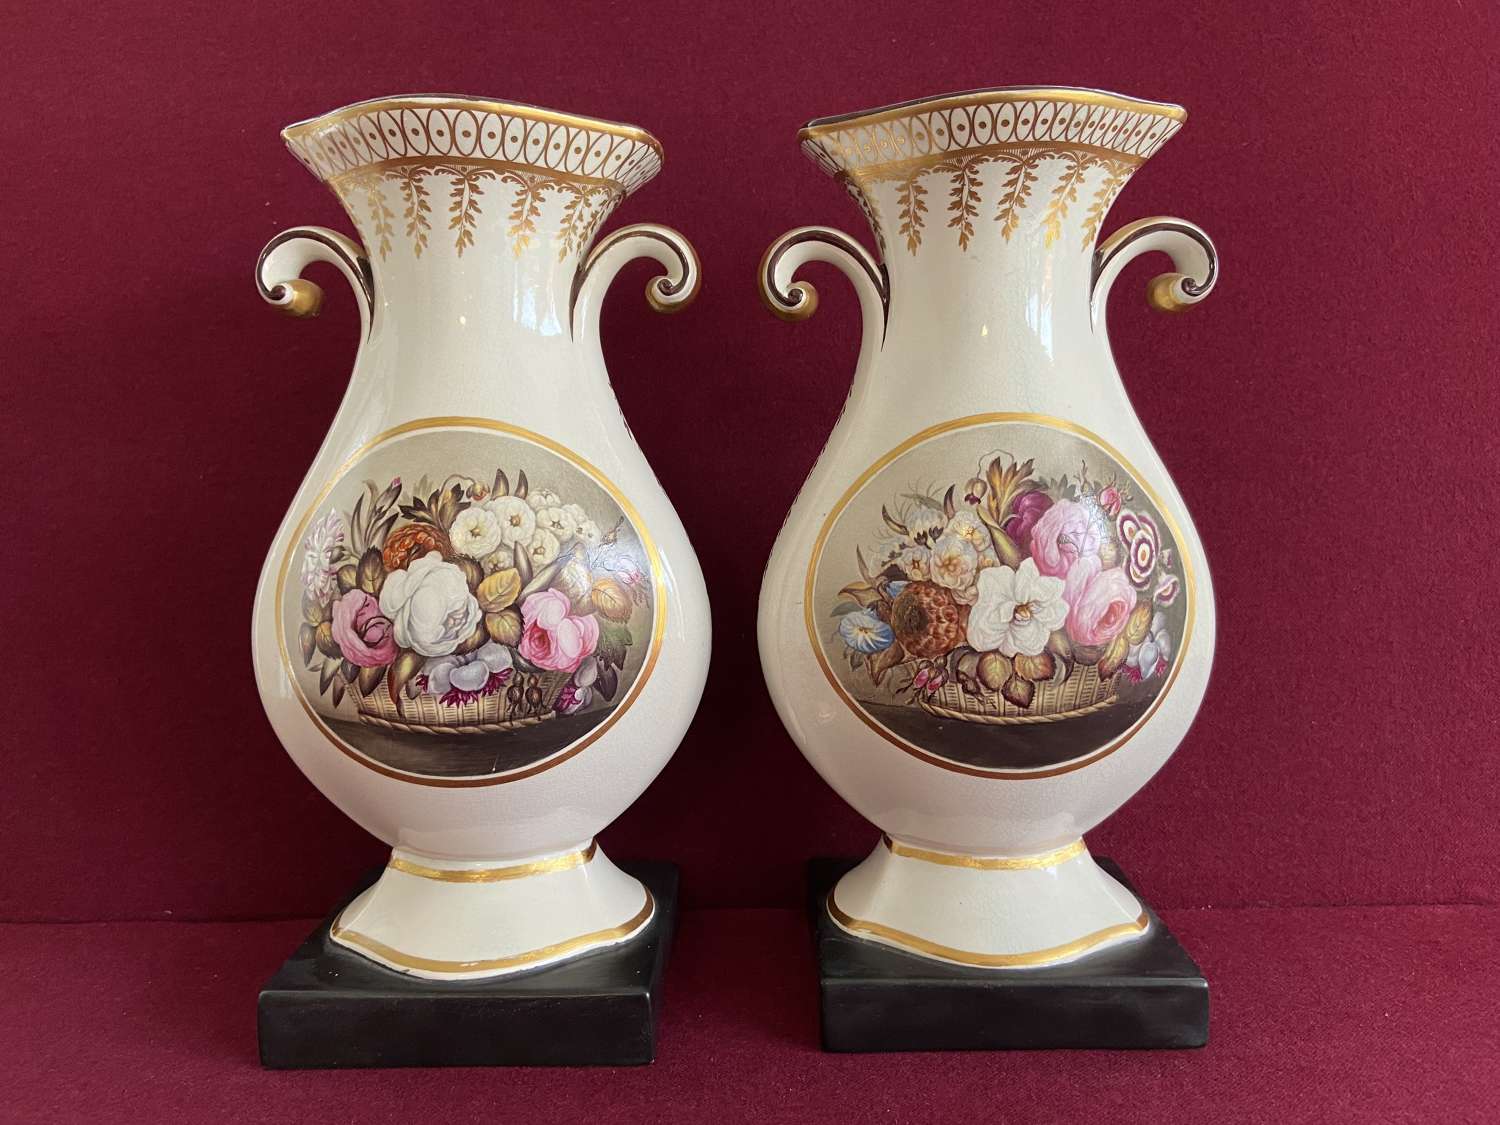 A pair of Staffordshire Pearlware Vases c.1790-1805